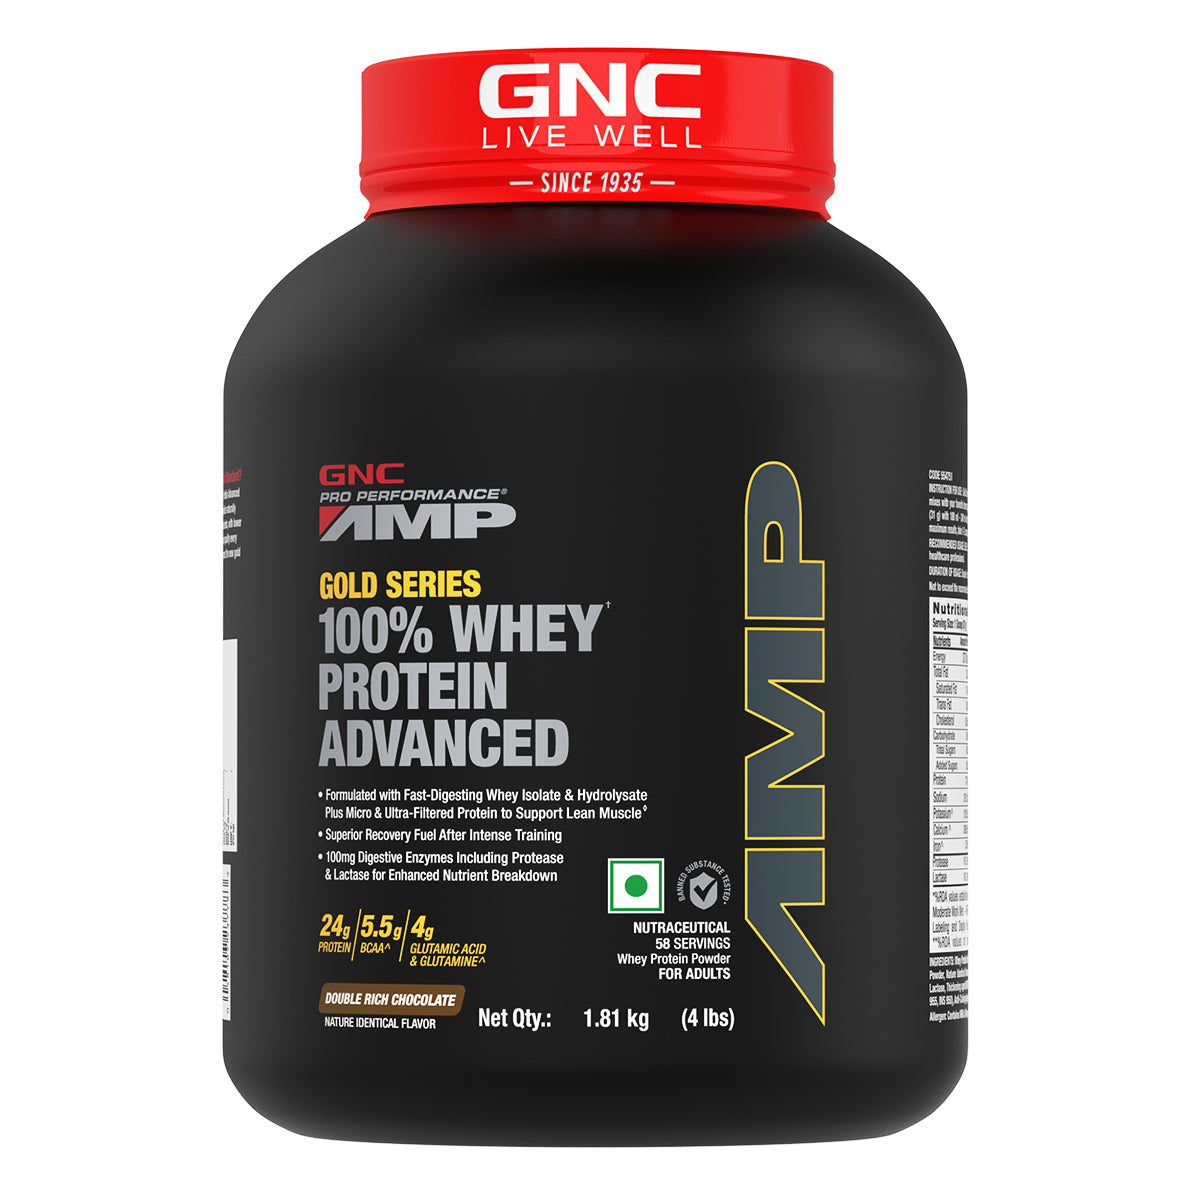 GNC AMP Gold Series 100% Whey Protein Advanced 4 lbs with Shaker - Boosts Muscle Gains, Recovery & Workout Performance | Informed Choice Certified